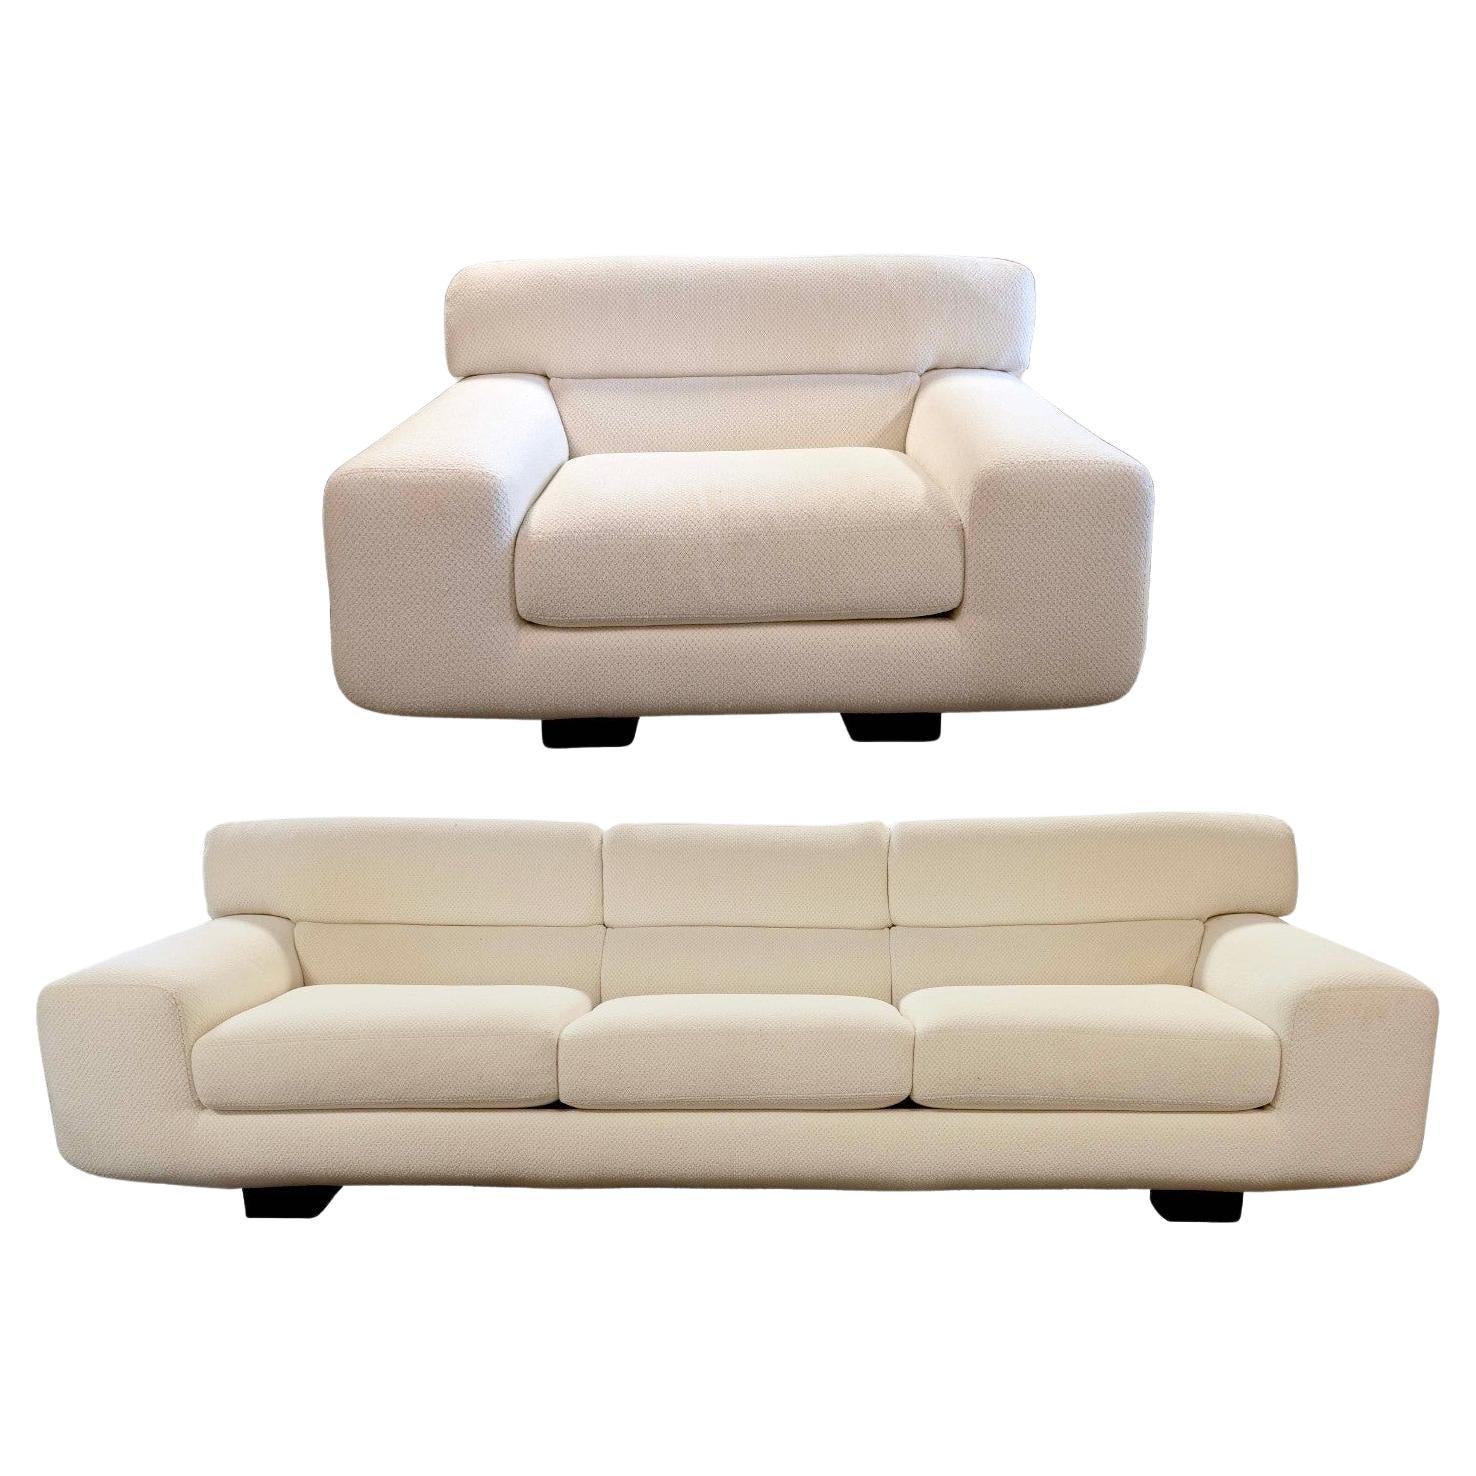 Contemporary Modern White Preview Furniture Corporation Sofa and Lounge Chair For Sale